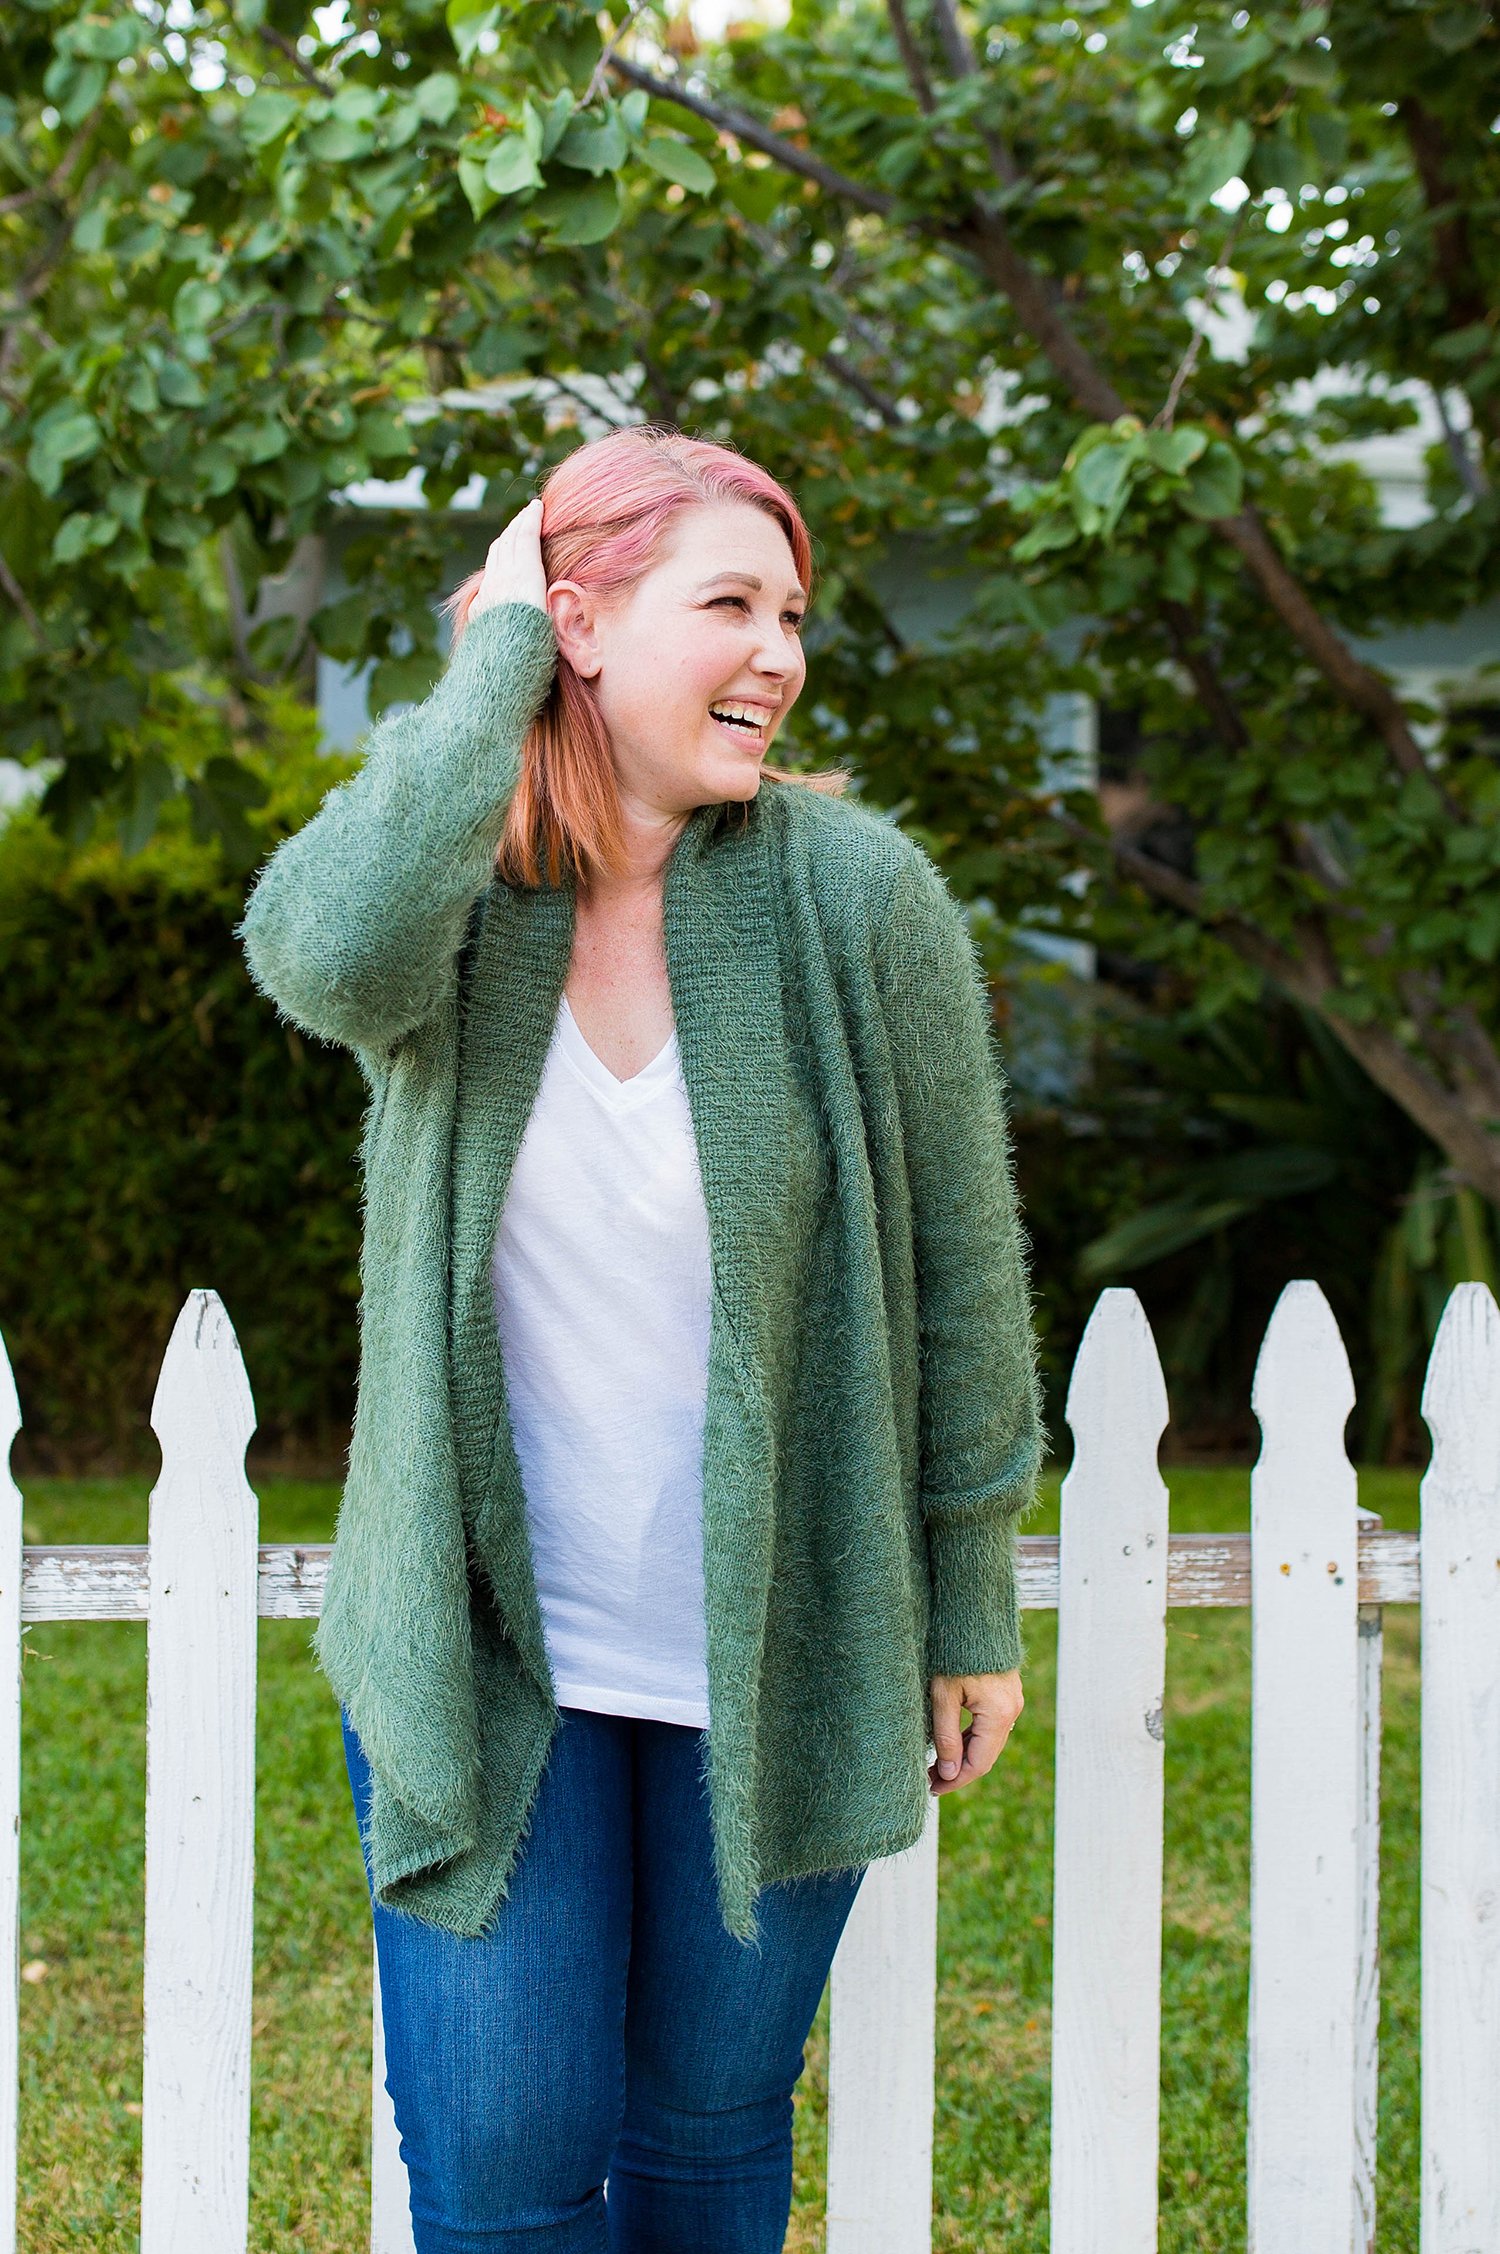 Looking for cozy sweaters for fall? This green cardigan is adorable!